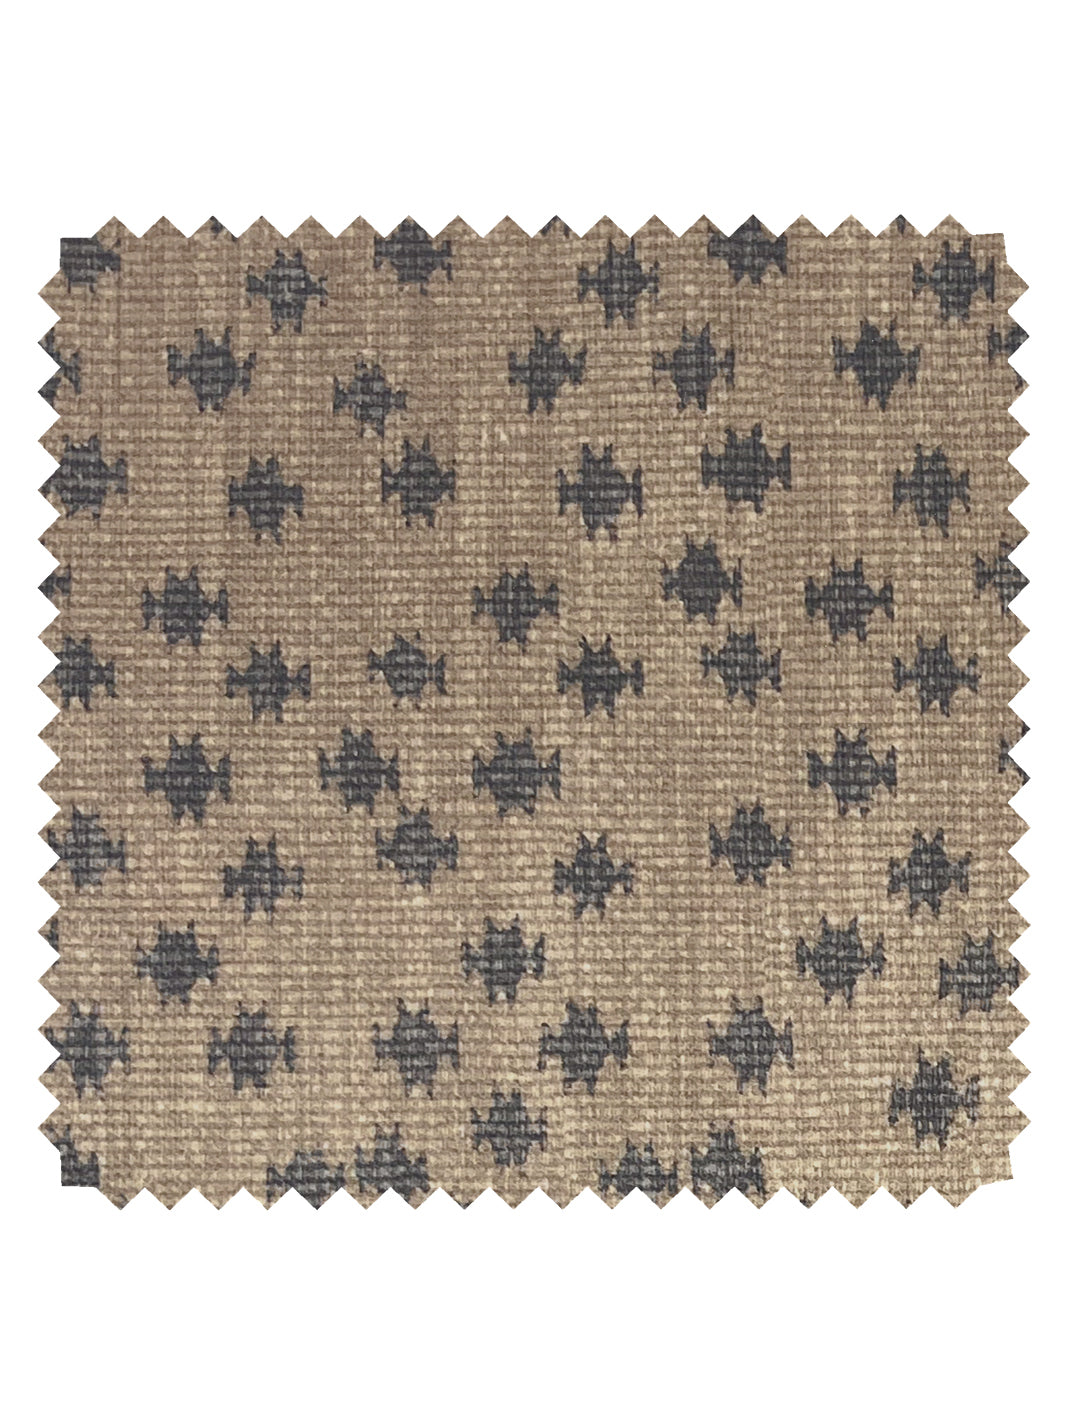 'Northstar Star' Linen Fabric by Nathan Turner - Brown